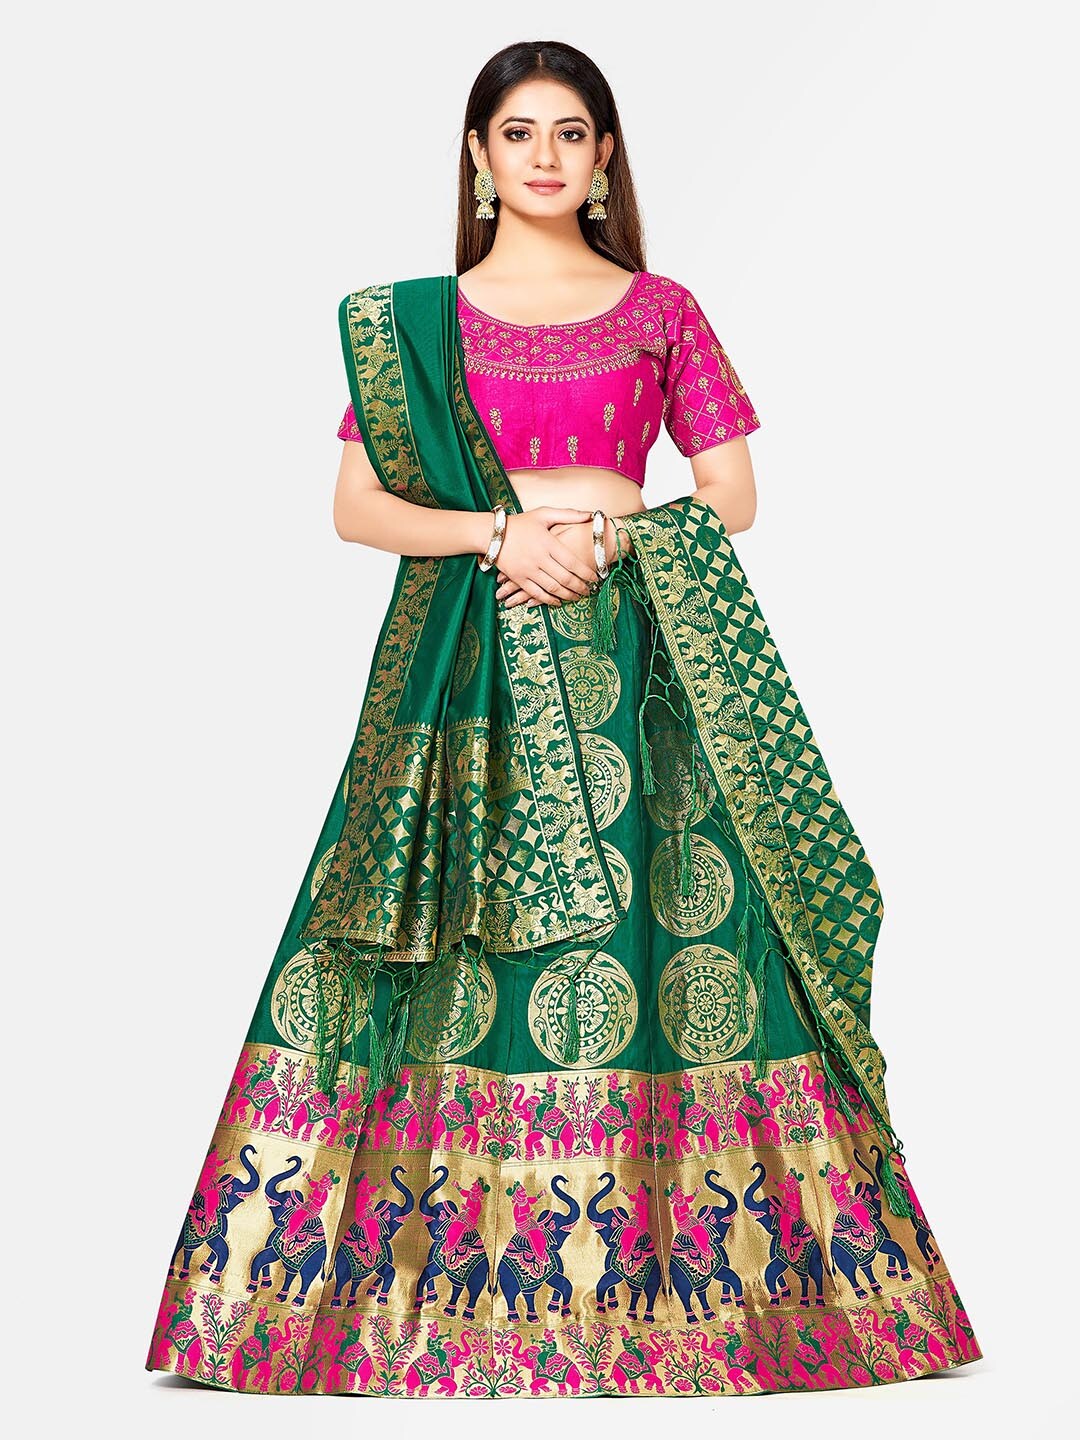 MIMOSA Green & Pink Woven Design Semi-Stitched Bridal Lehenga & Blouse with Dupatta Price in India